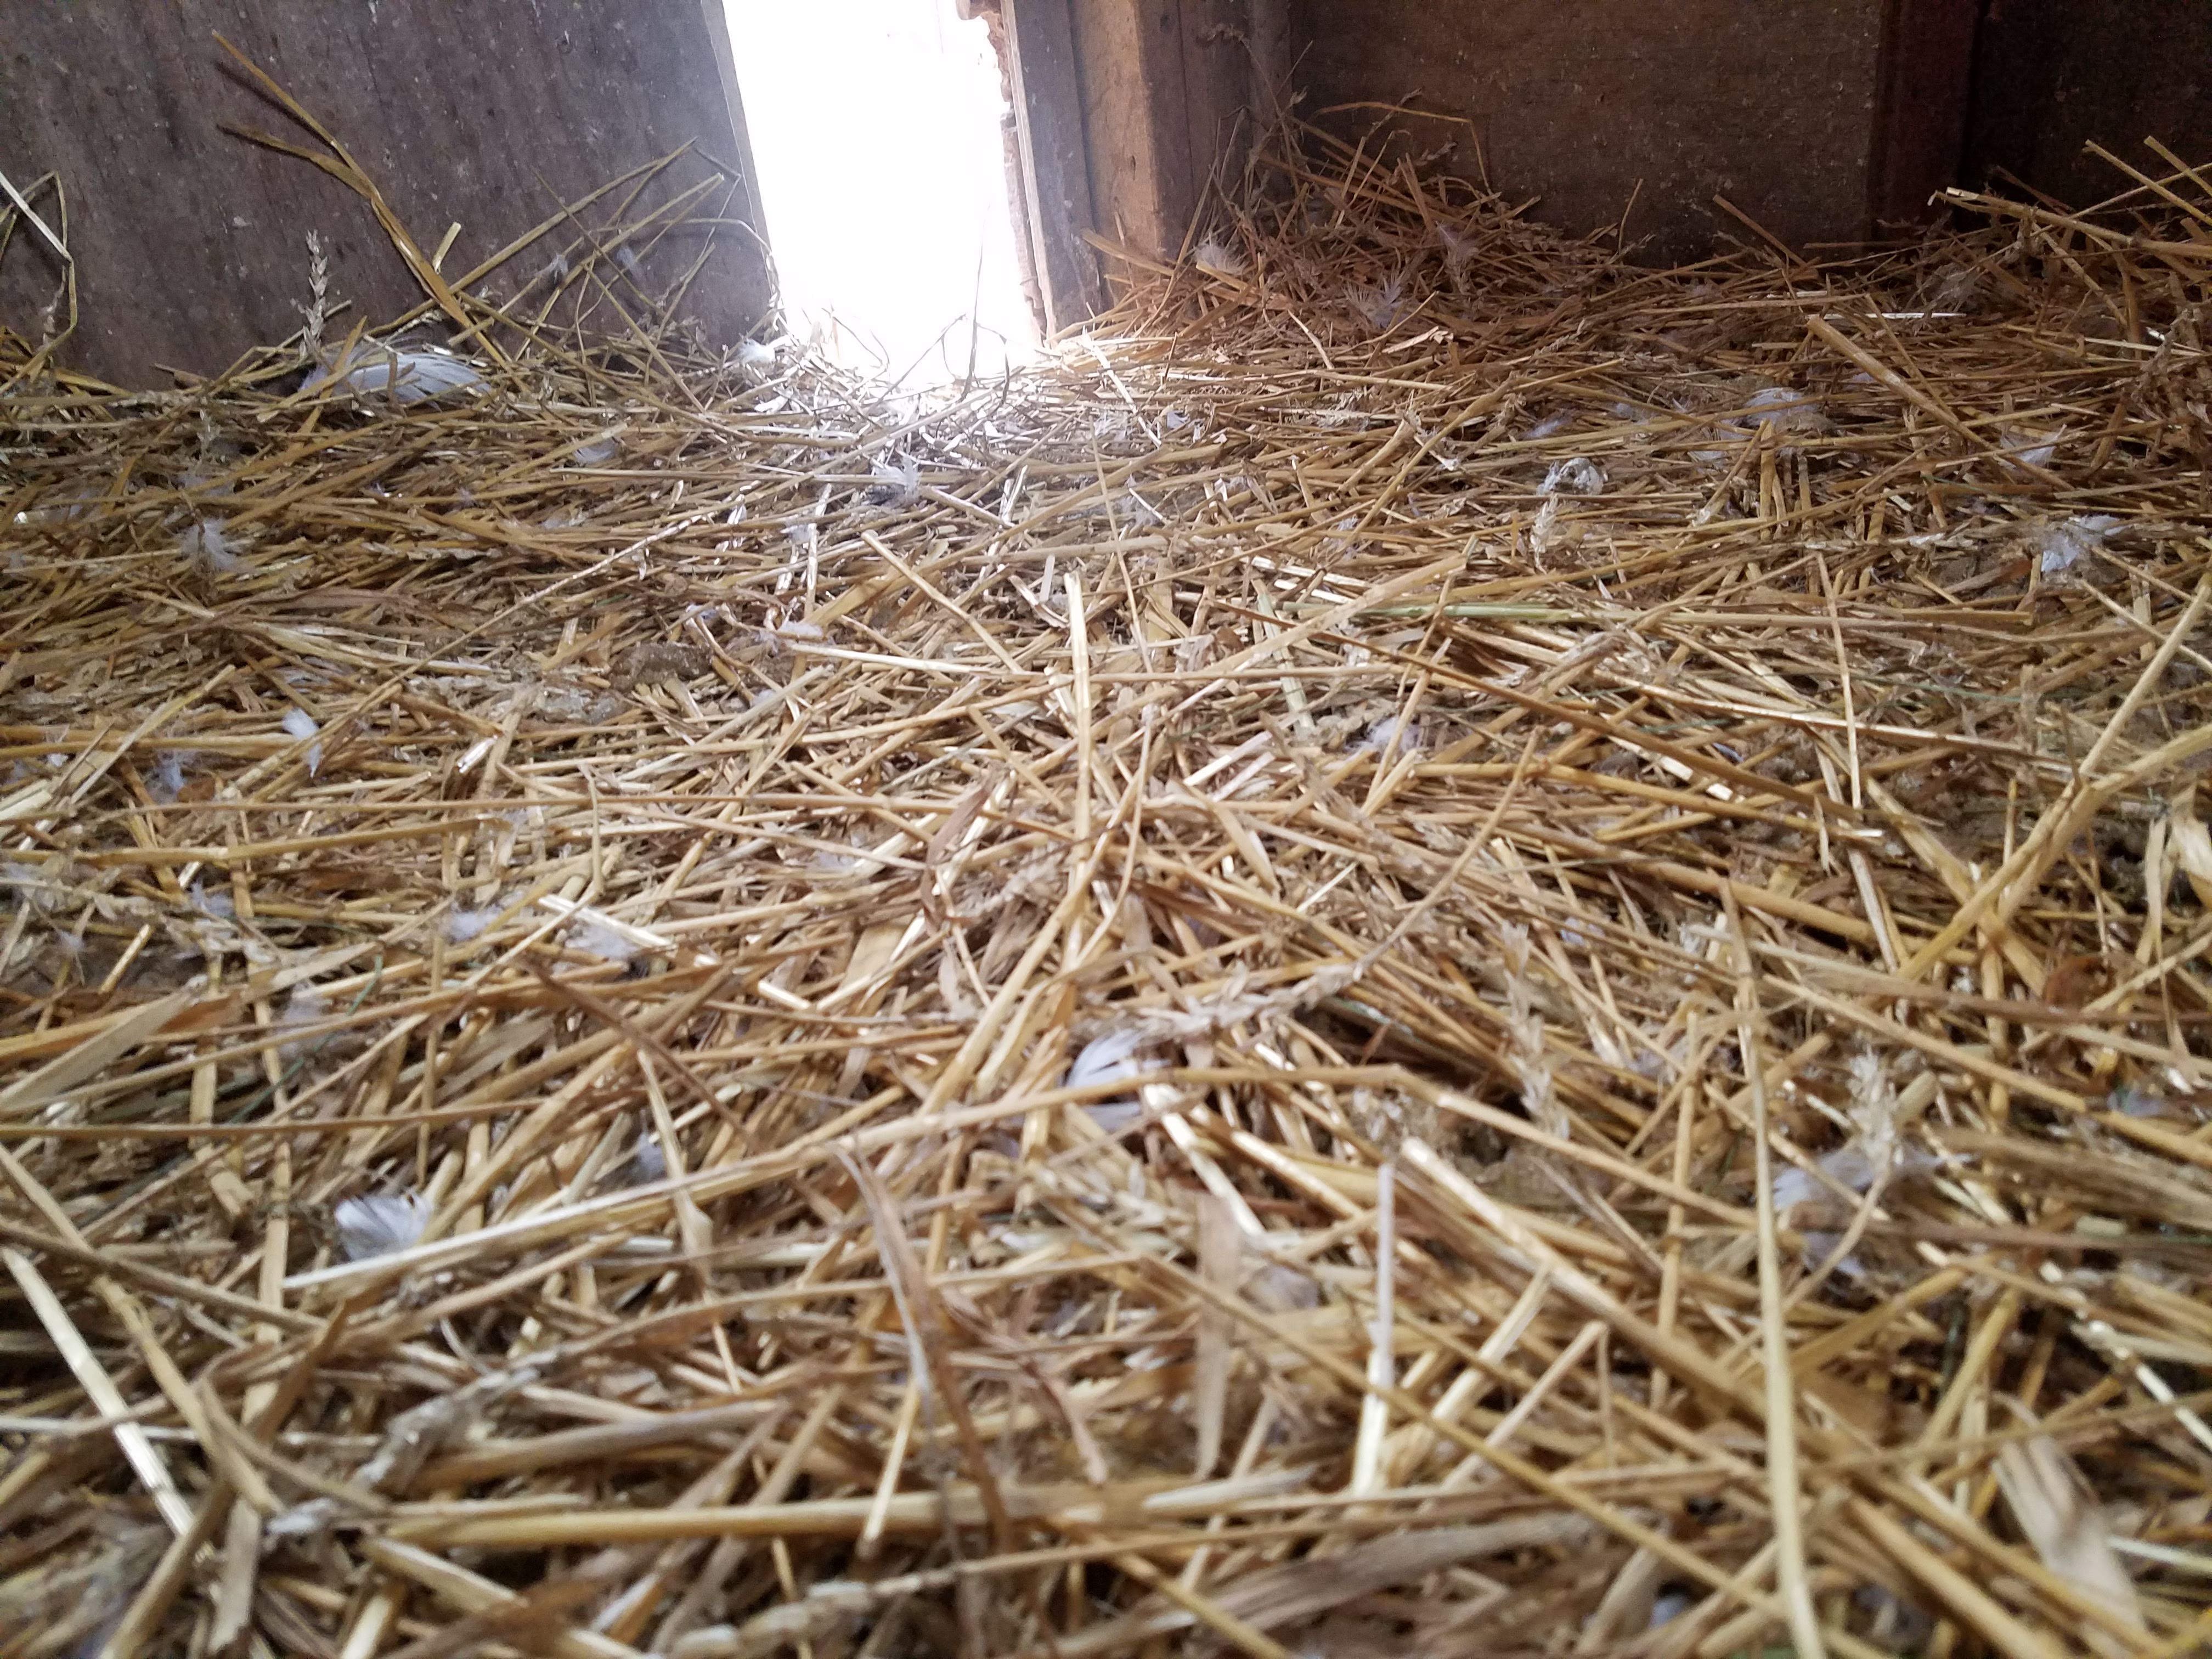 Duck coop with straw bedding. There is a small door in the background